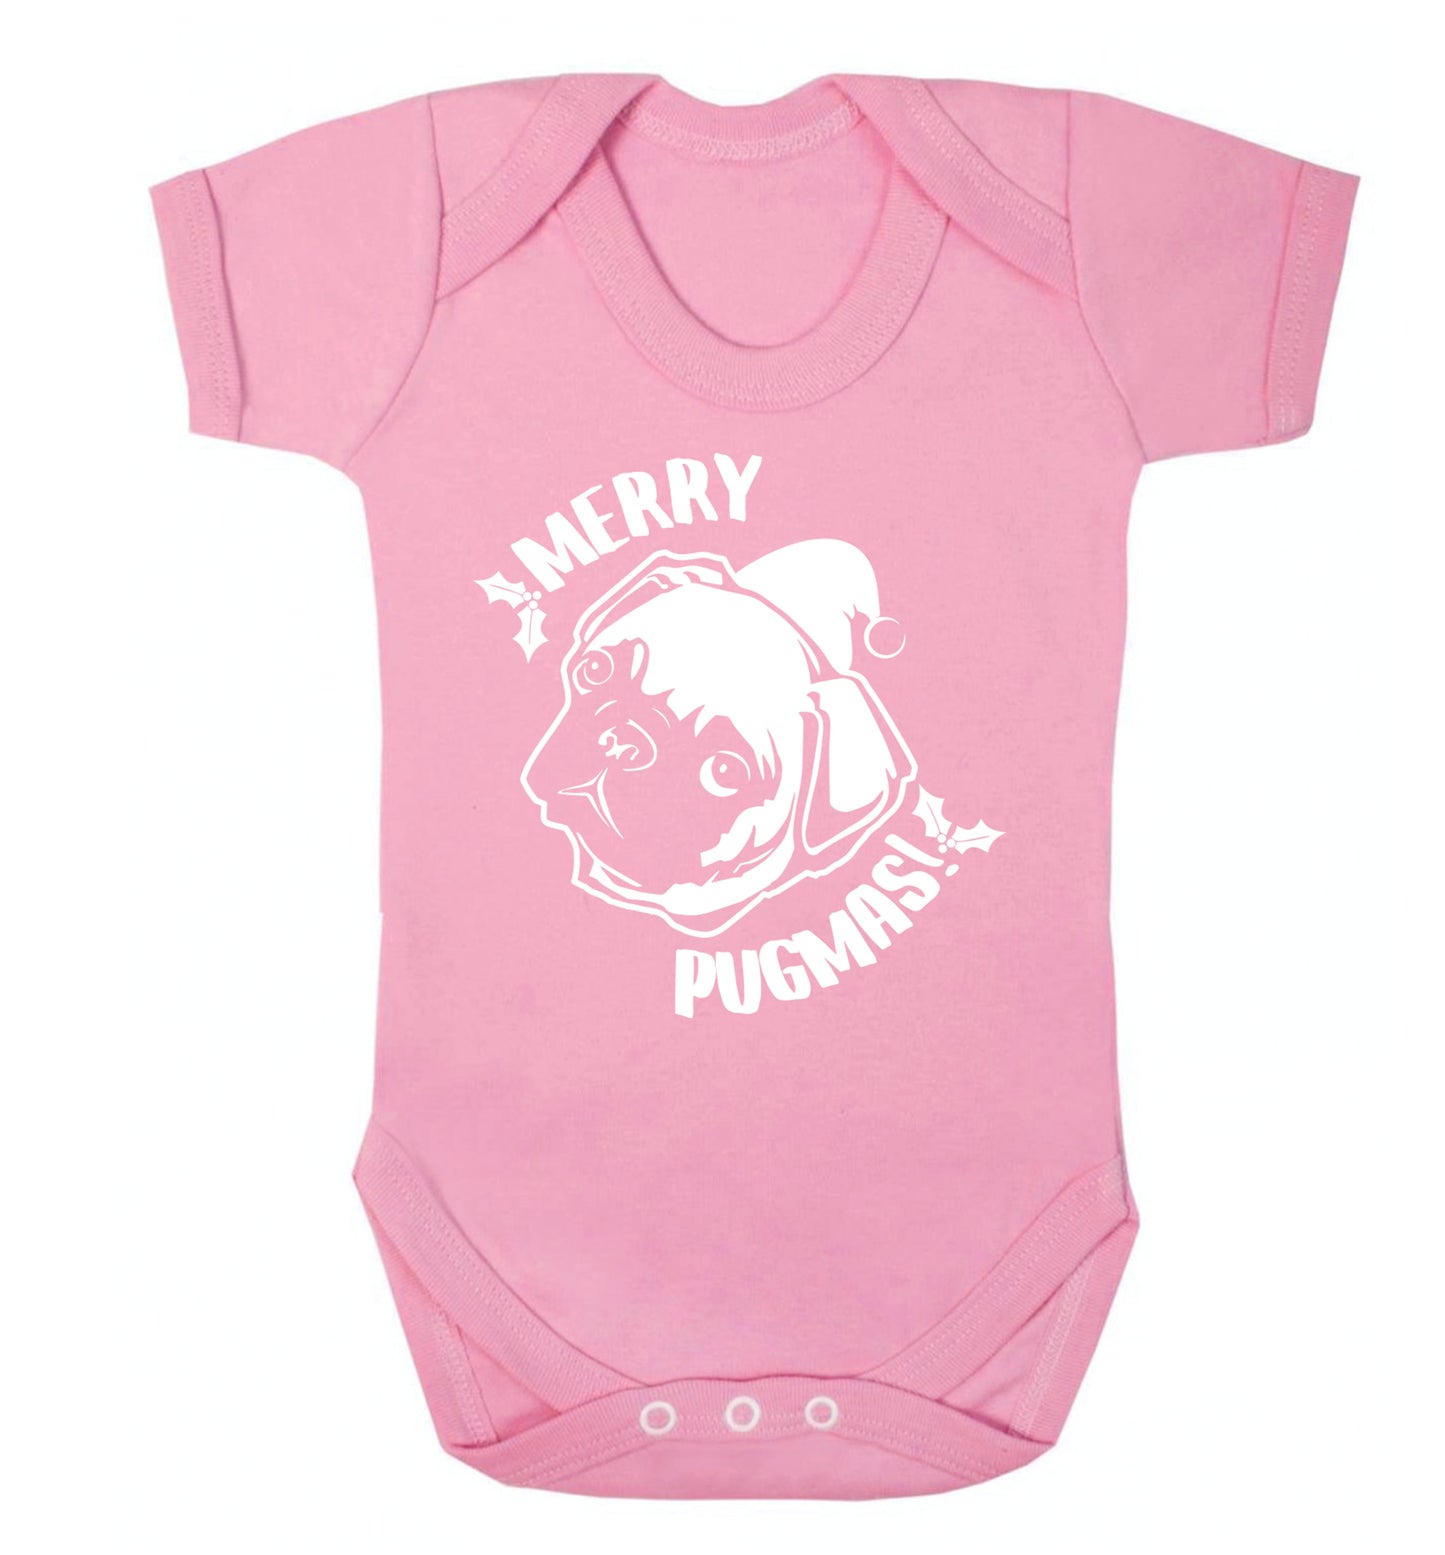 Merry Pugmas Baby Vest pale pink 18-24 months